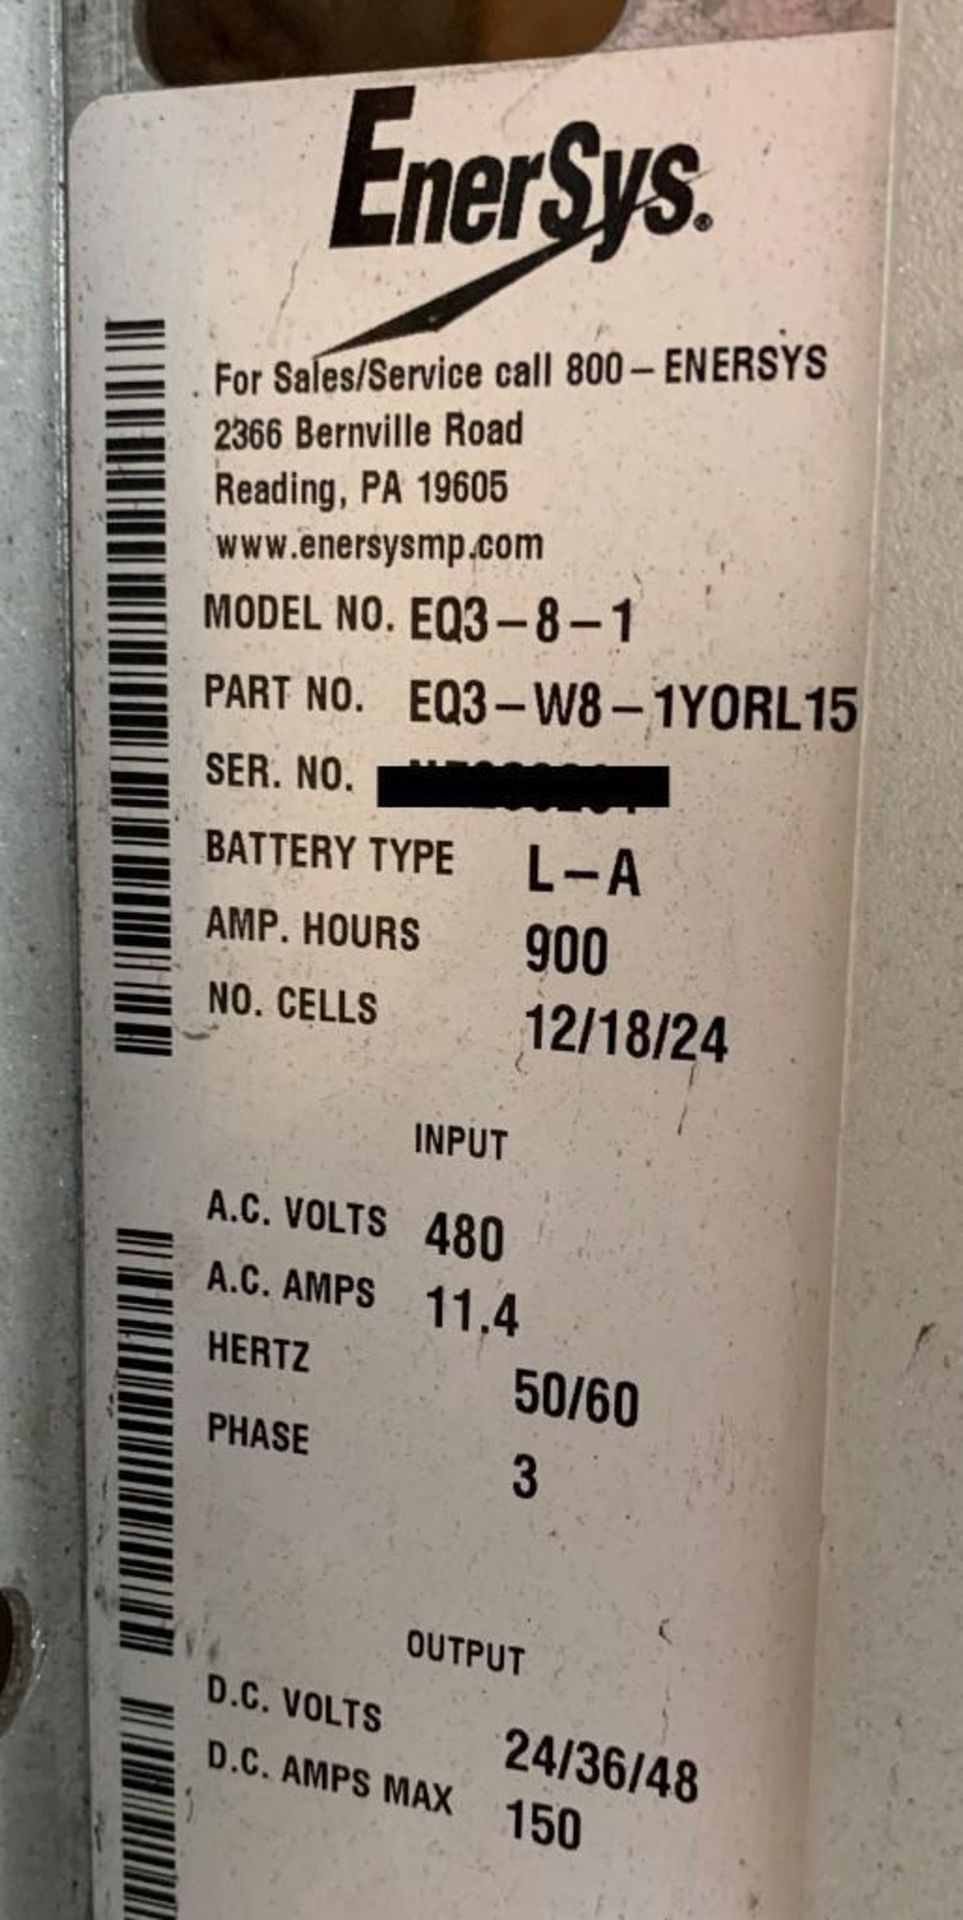 ENERSYS ENFORCER HIGH FREQUENCY MULTI-VOLT BATTERY CHARGER, MODEL EQ3-10-1, 1,500 AMP HOURS, 24/36/4 - Image 3 of 4